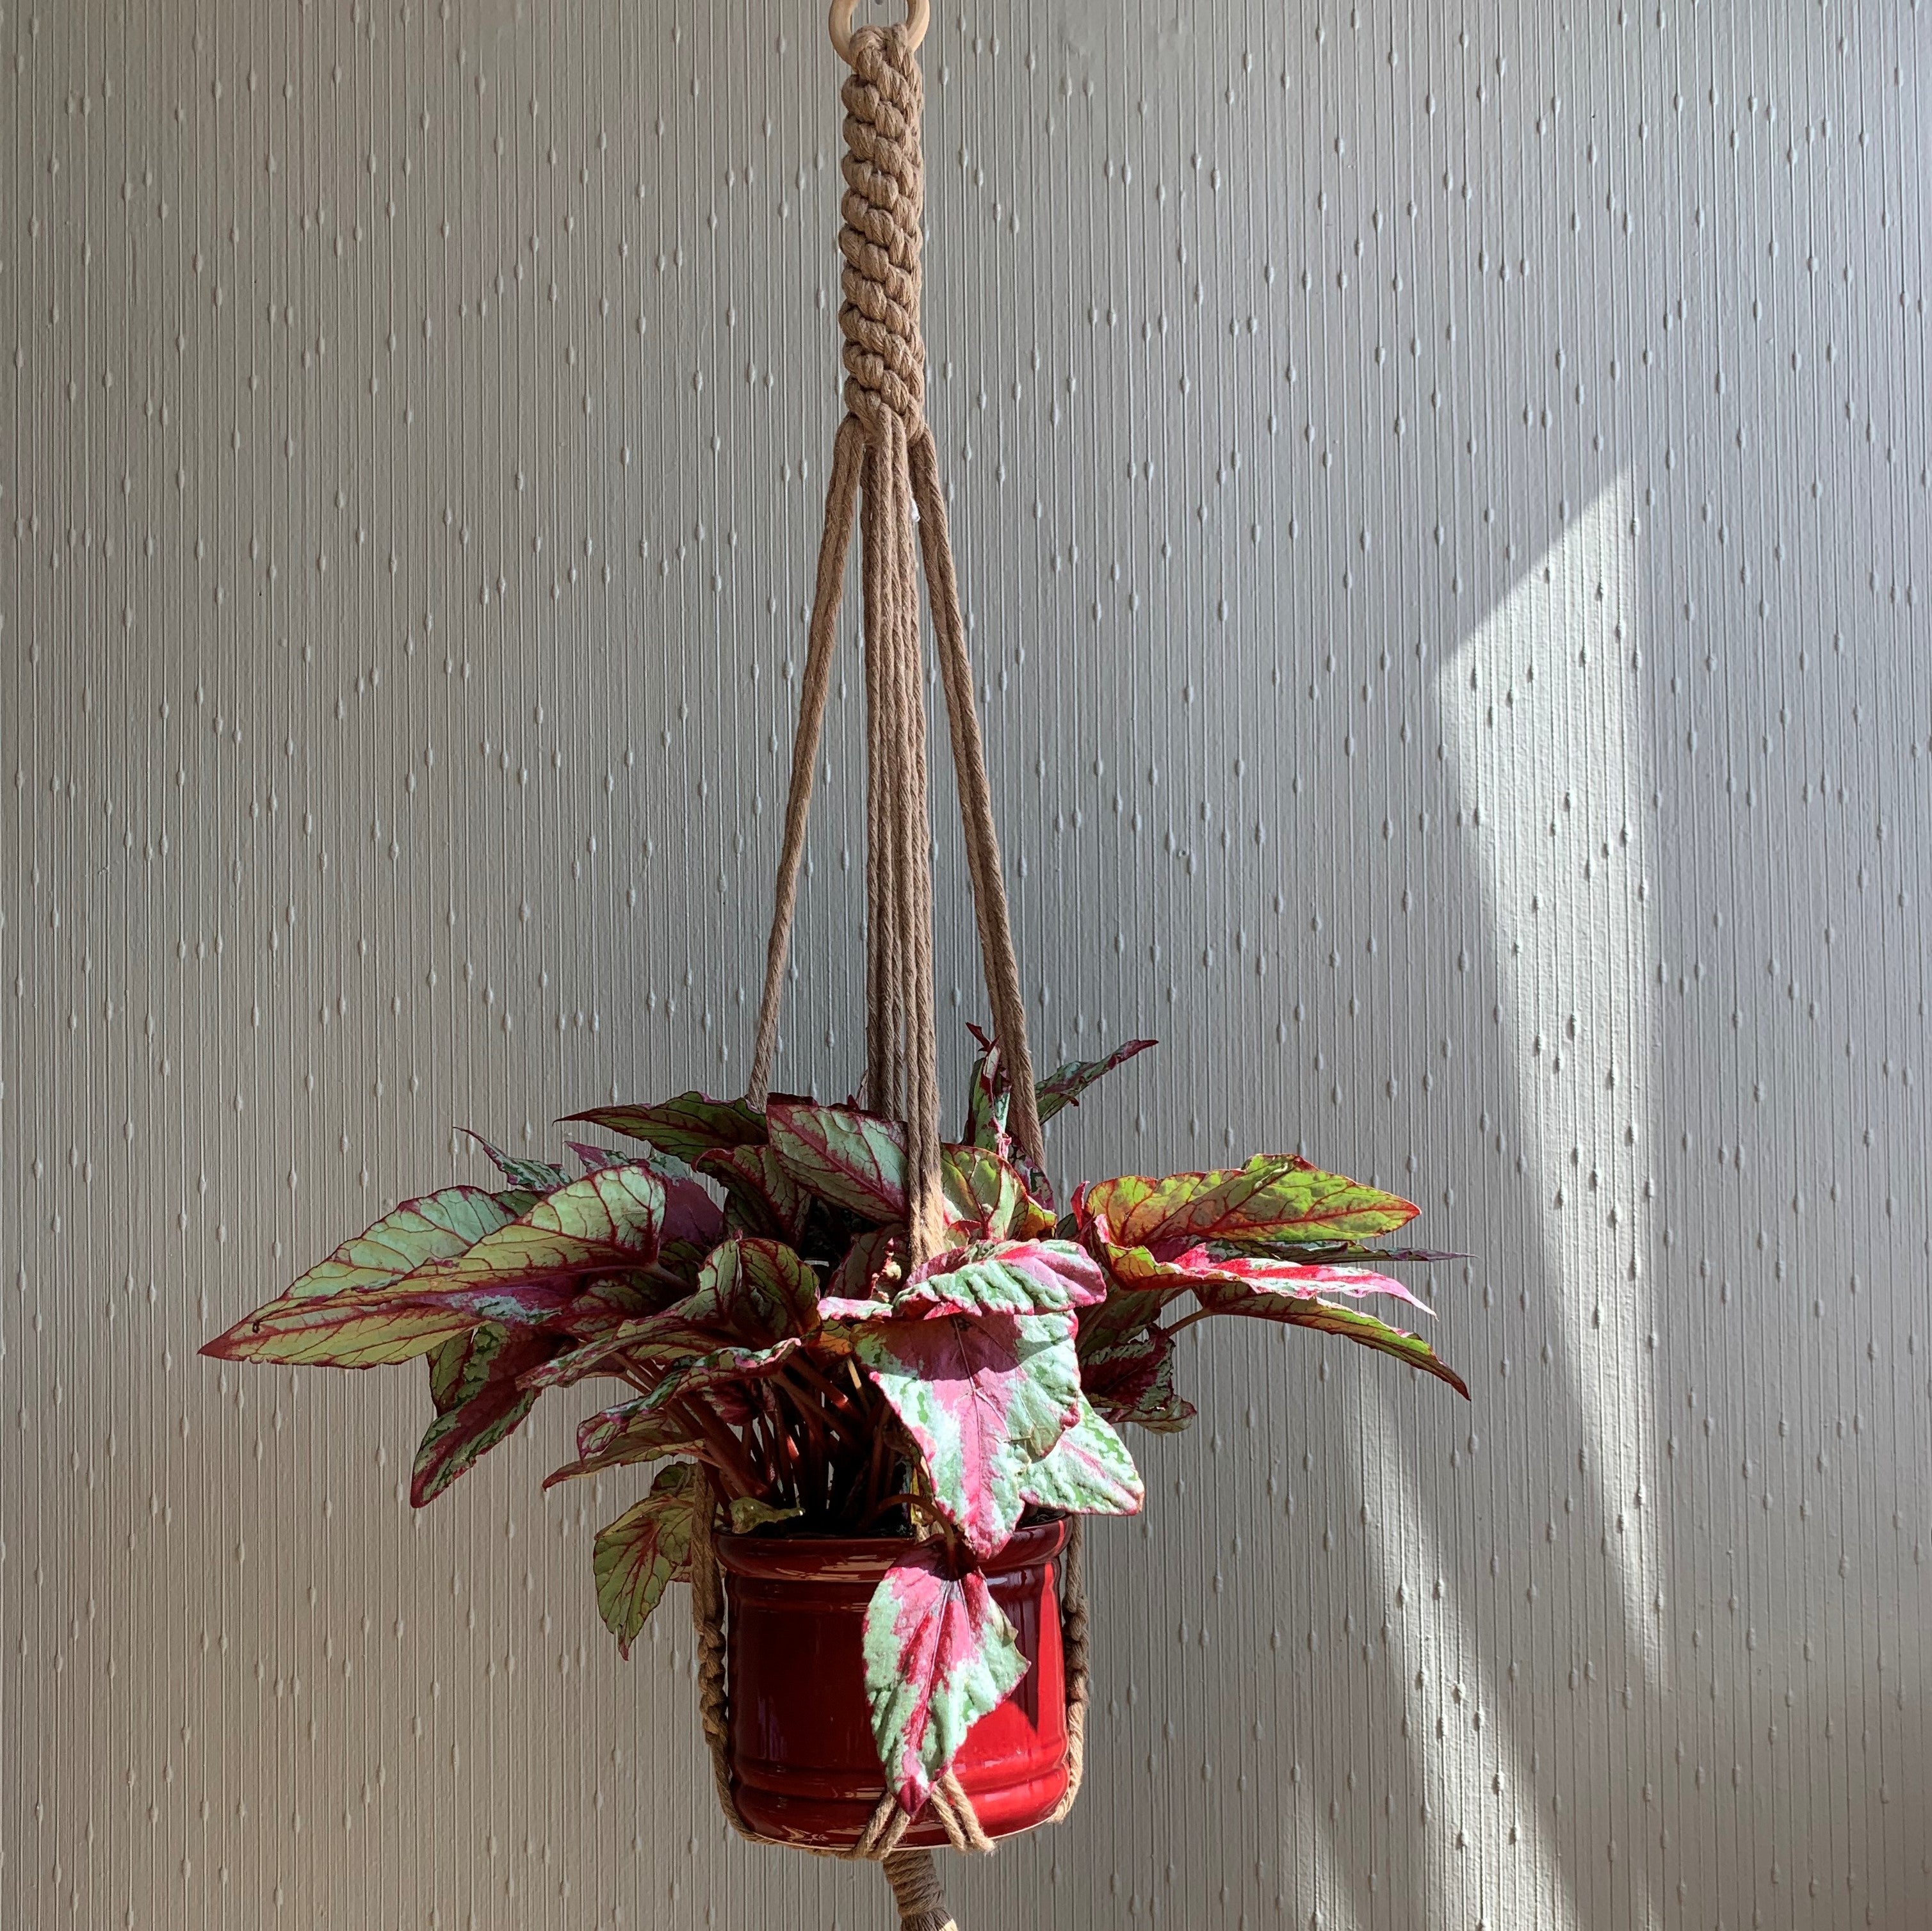 A brown macrame plant hanger  with an indoor plant in a maroon planter hanging from the ceiling